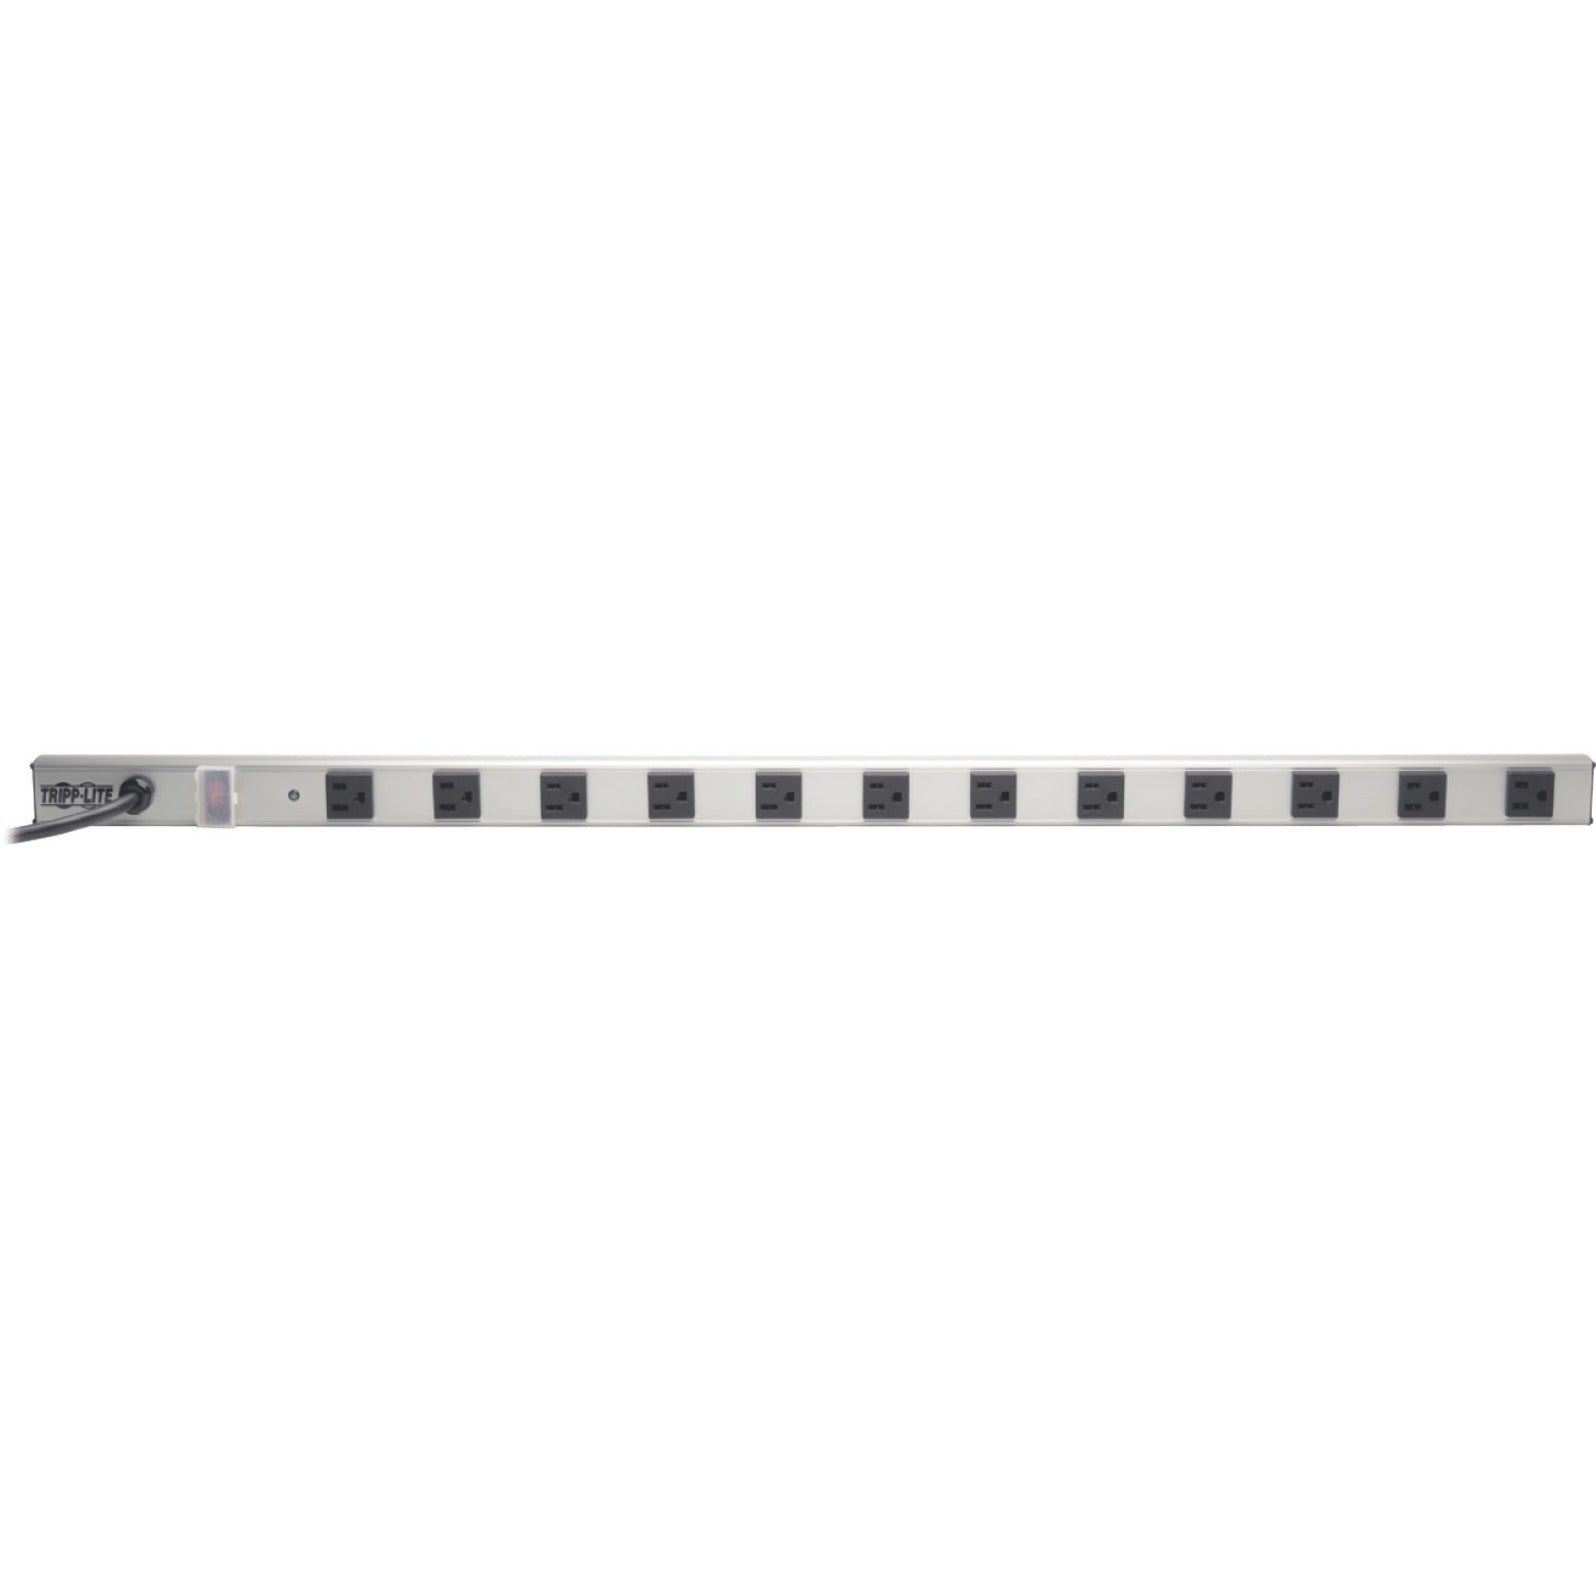 Tripp Lite SS3612 36-in. 12 Outlet Power Strip with Surge Suppression, 15-ft Cord, 1050 Joules